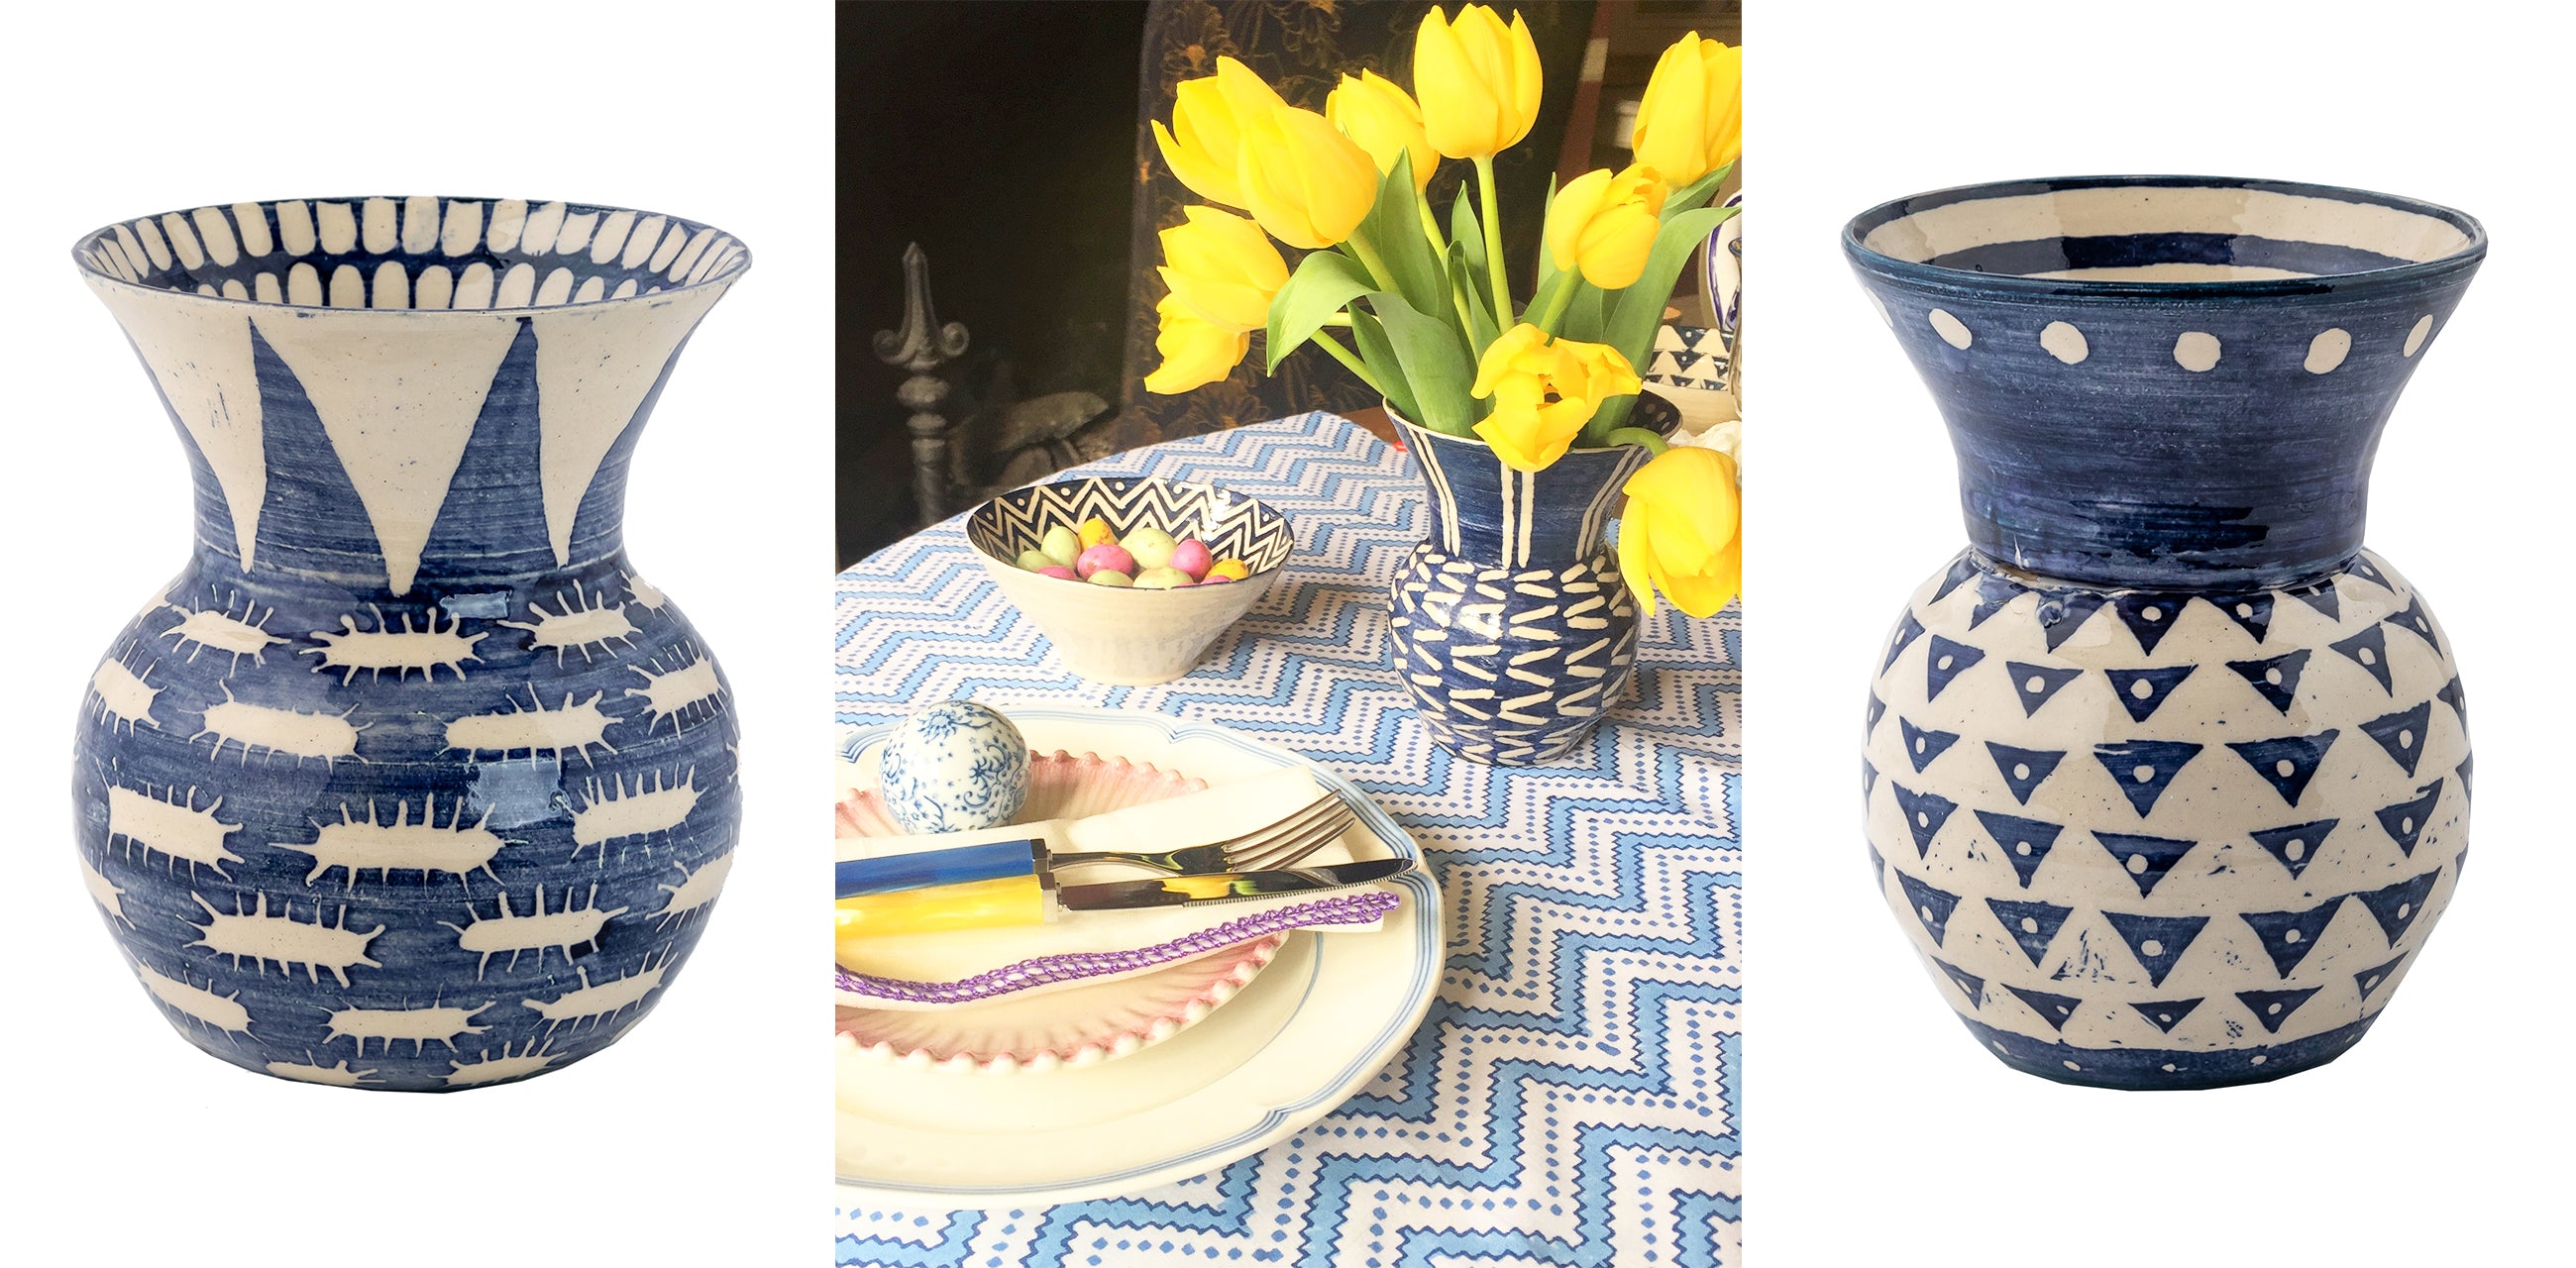 Our hand made Guatemalan vases are a great way to brighten up a table with or without flowers